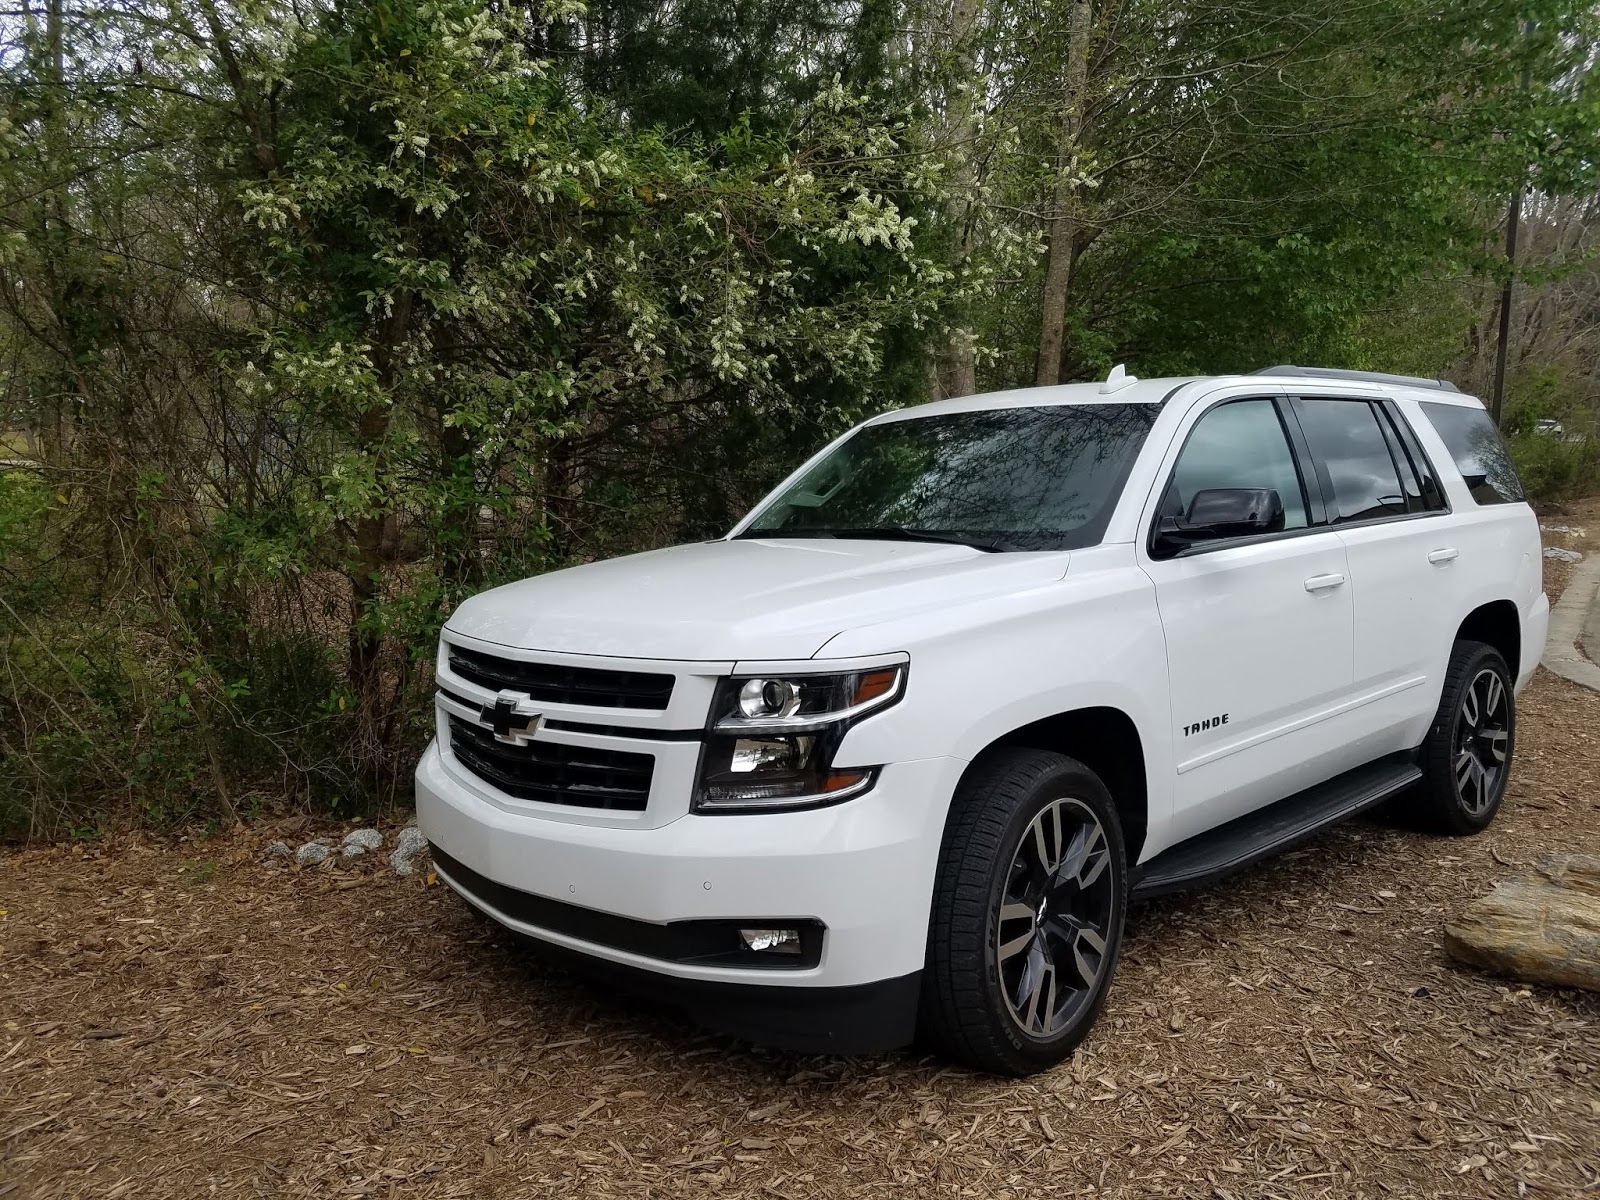 Auto Trends with JeffCars.com: Car Review: 2018 Chevy Tahoe Premier 4WD